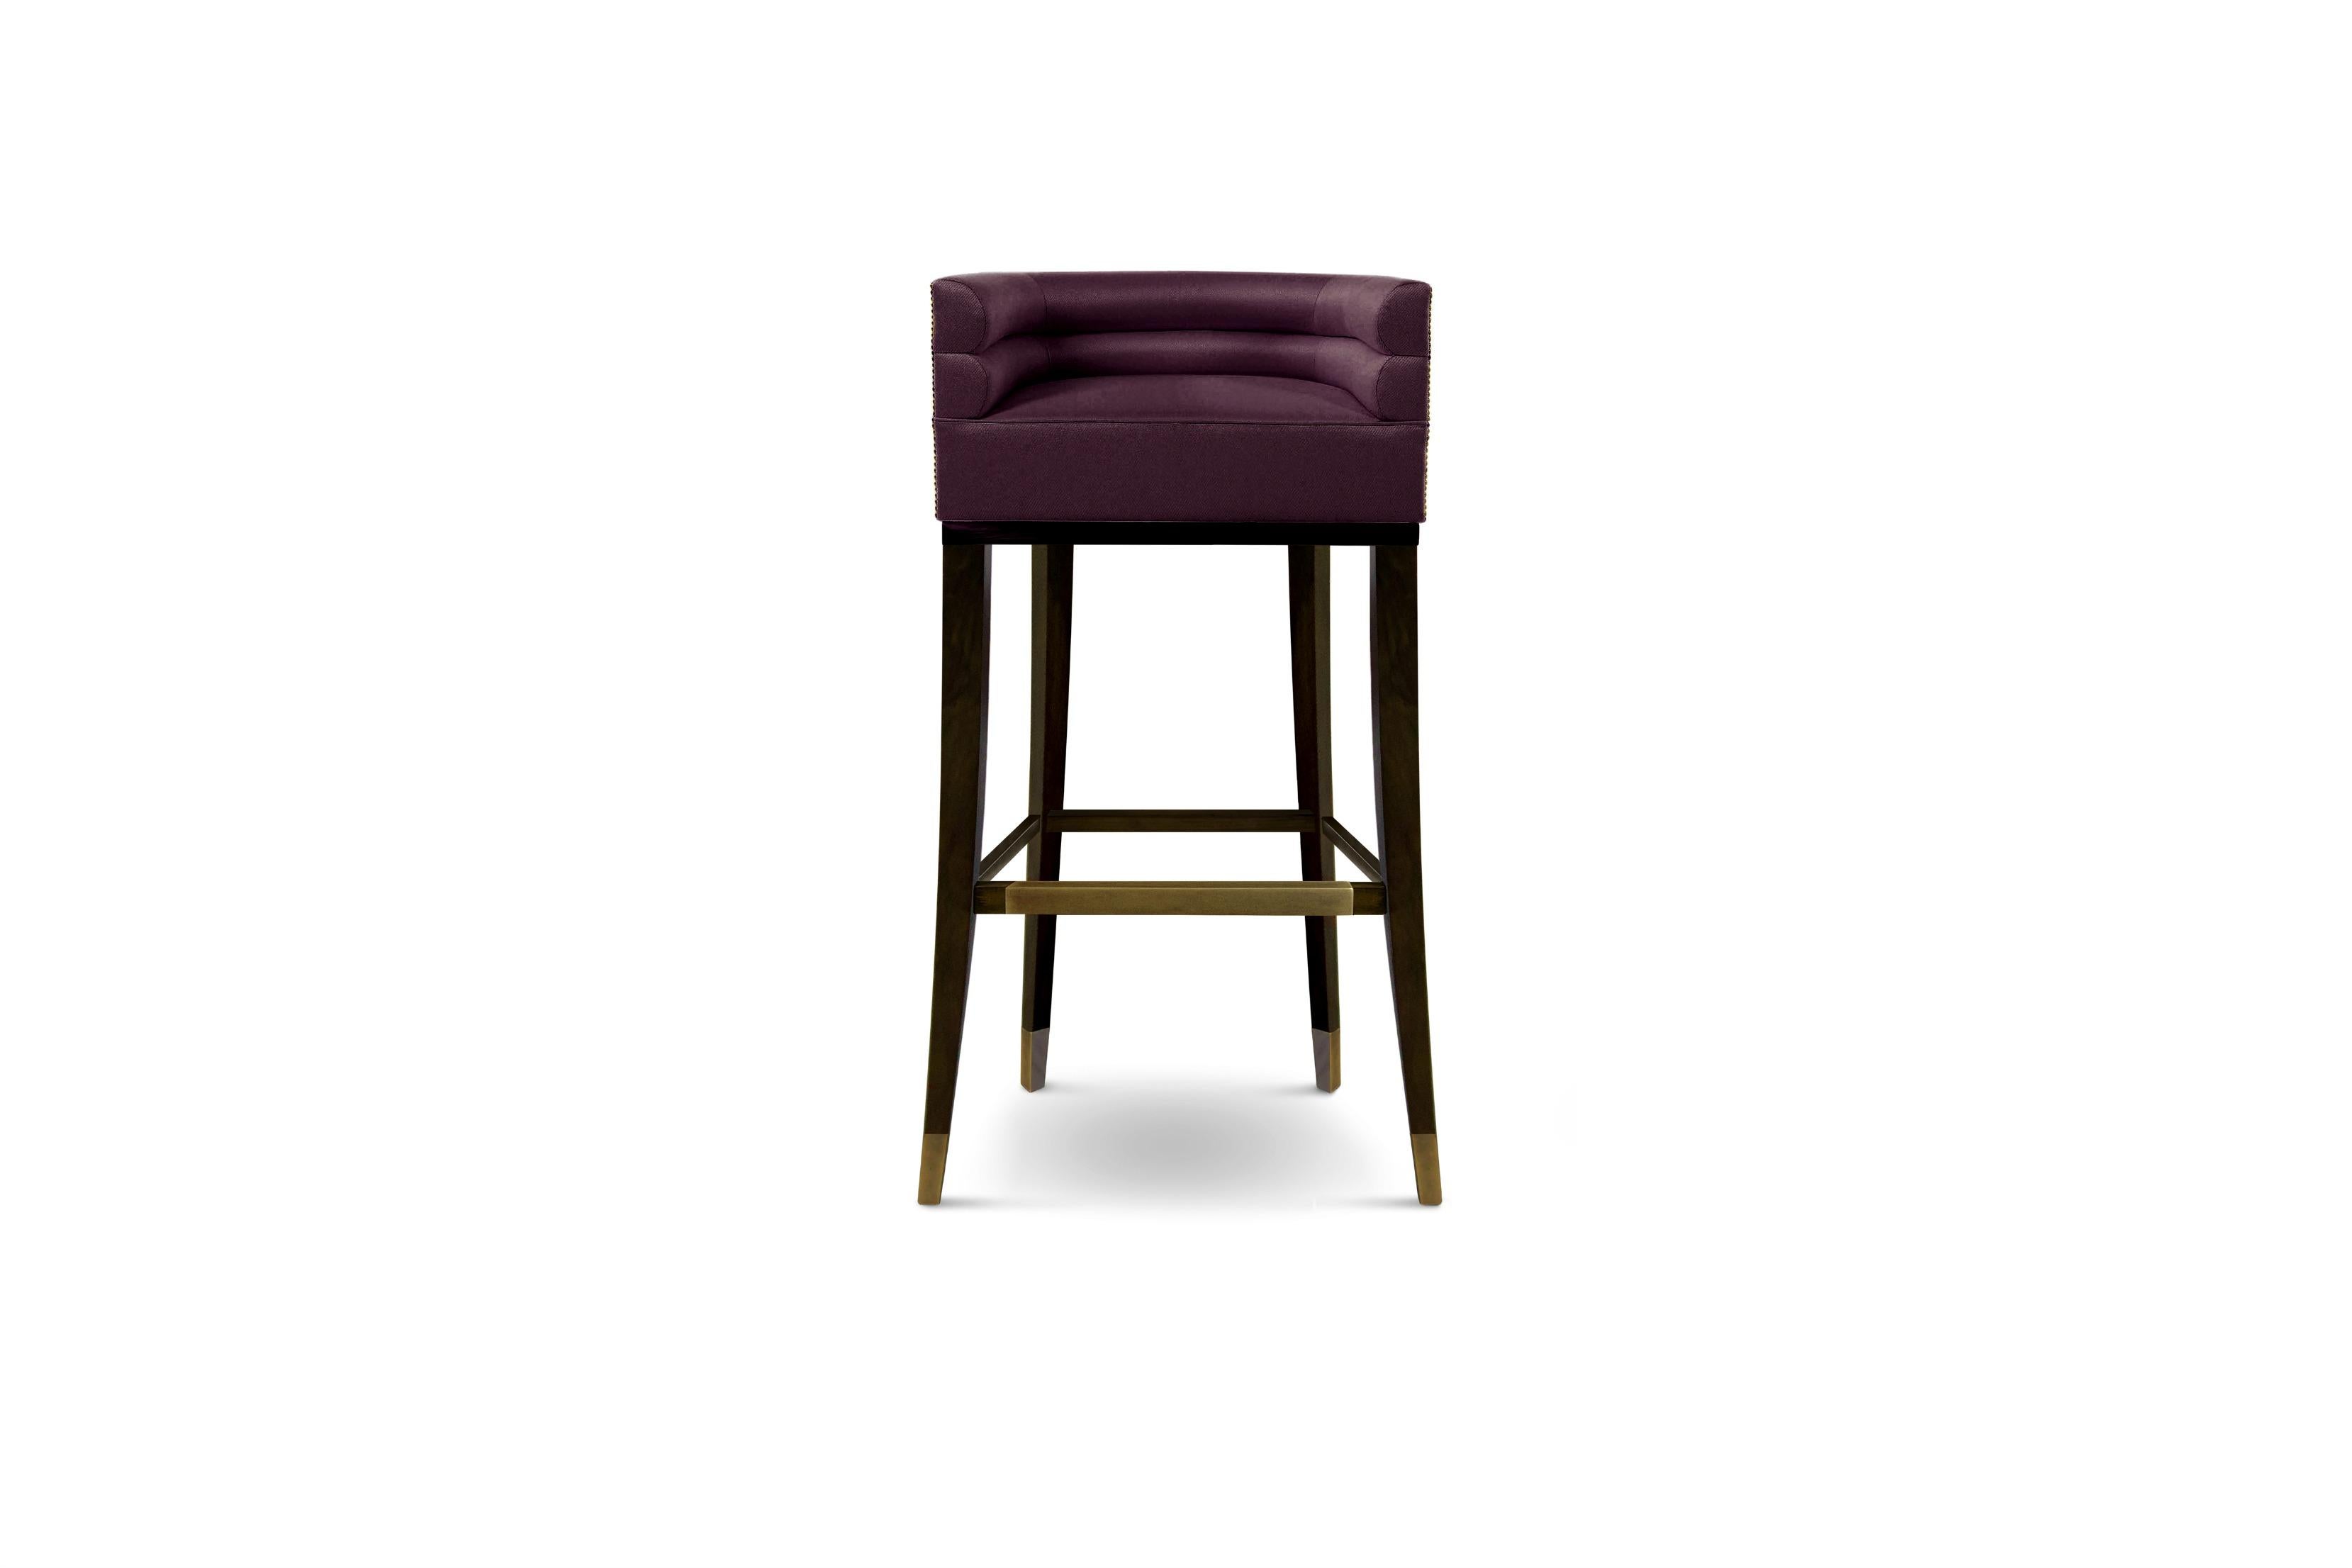 Maa is the language spoken by the Maasai tribe, known for its harmonious dialect. MAA Bar Chair pays tribute to it. This channel-tufted bar stool with back features a nailhead trim that wraps around the piece and legs in ash with walnut stain matte